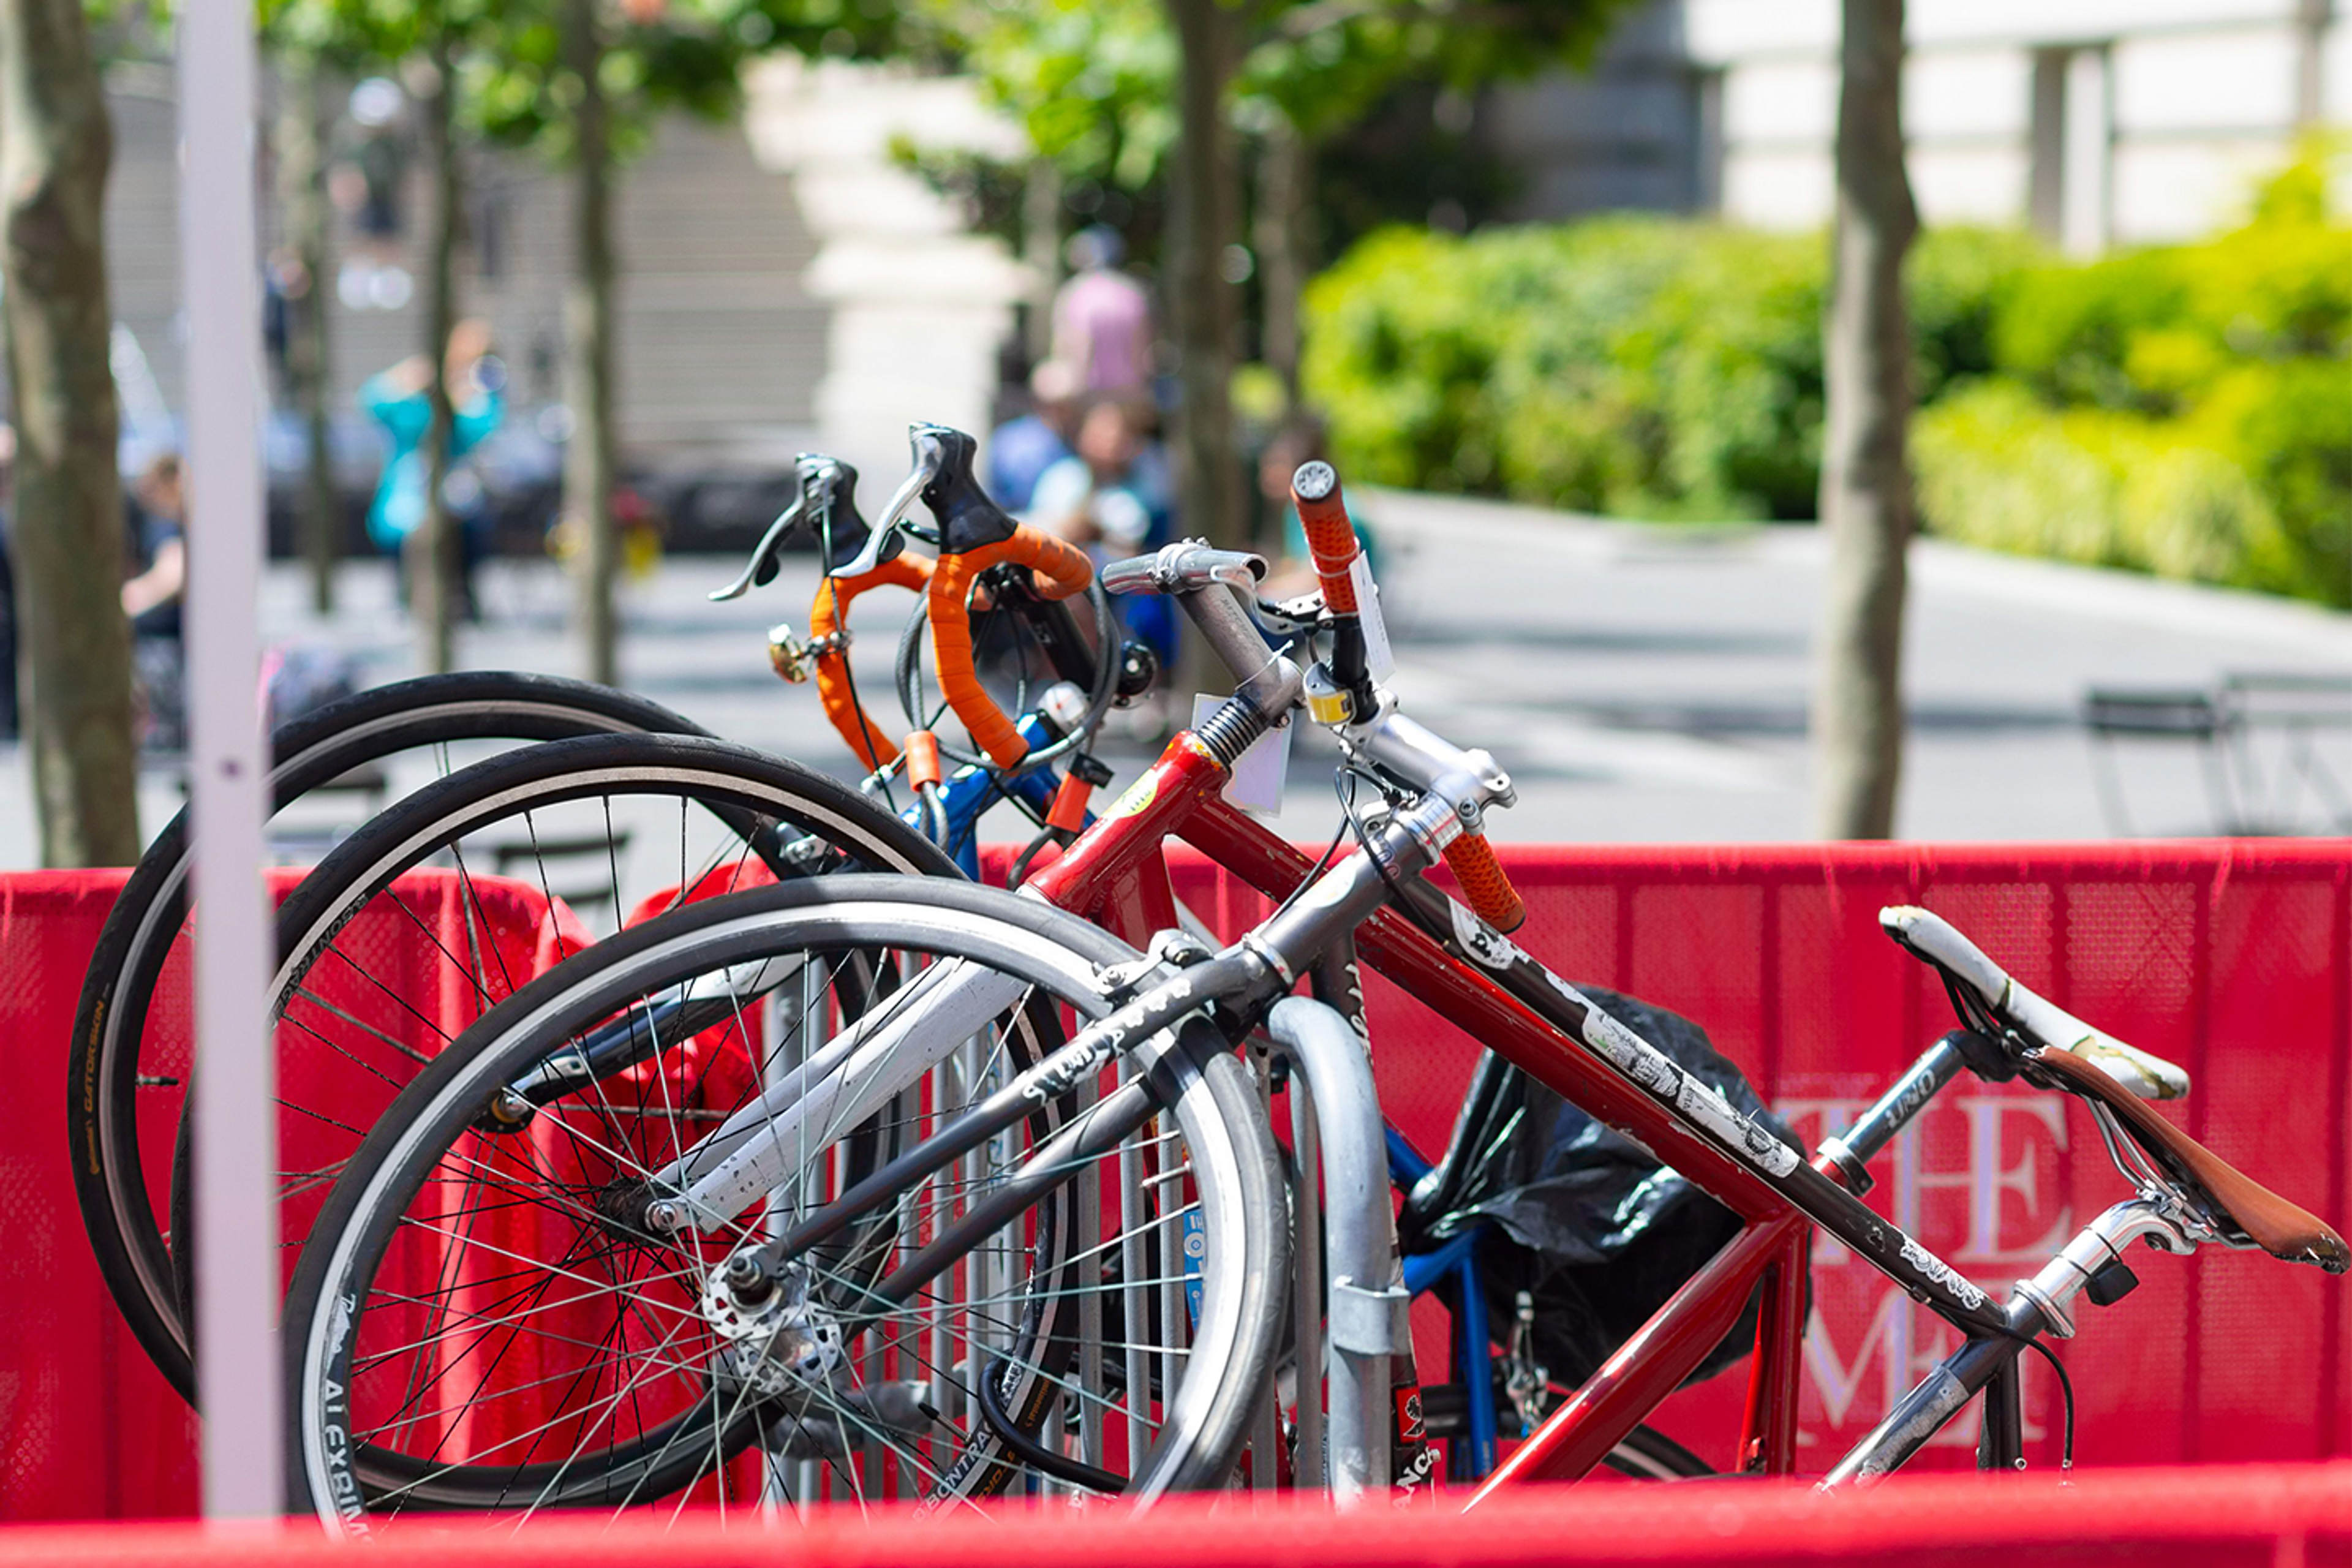 Bikes are hung at The Met's free bike valet.